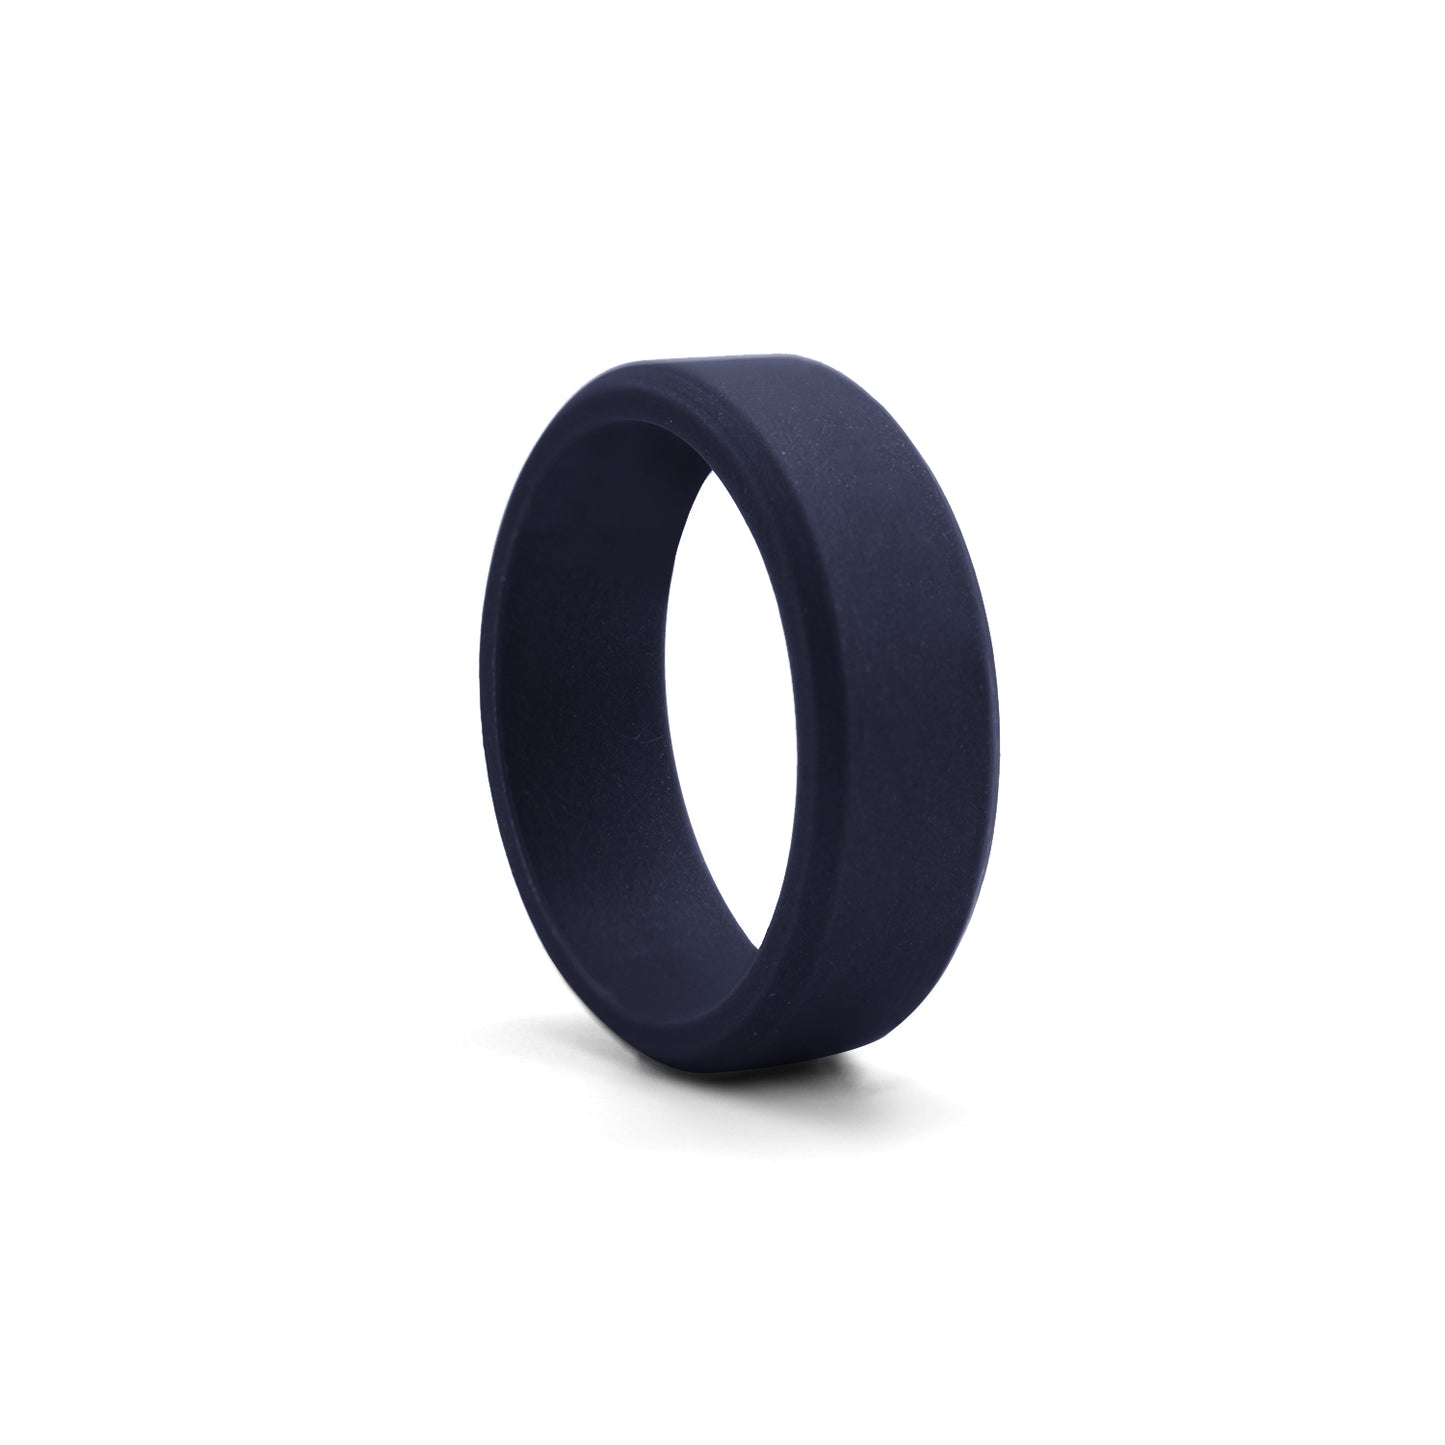 Bevel Silicone Rings